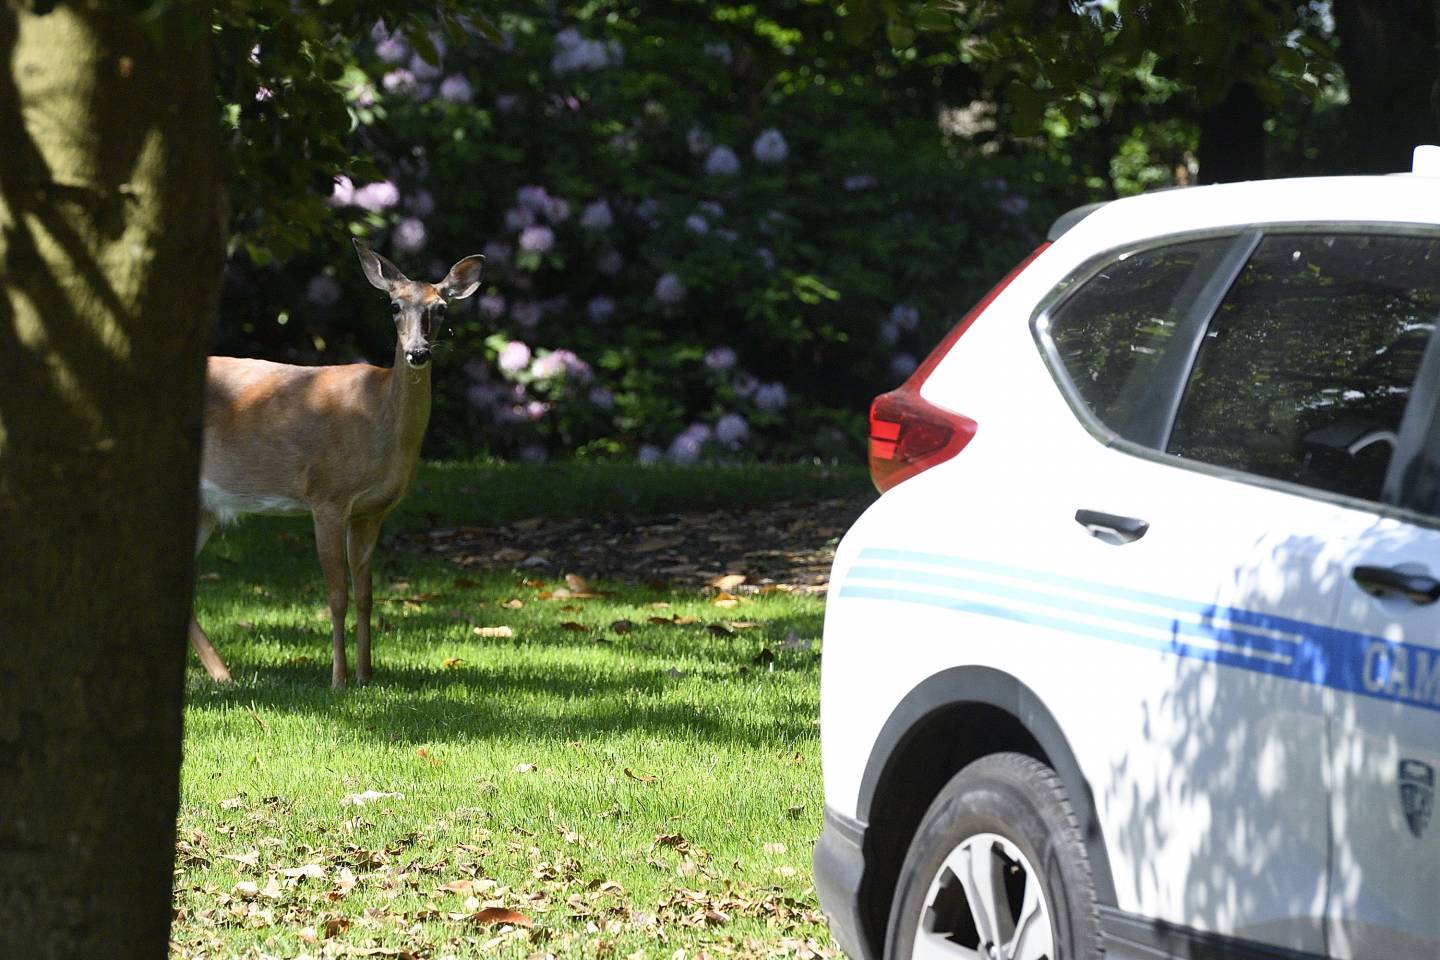 A deer is photographed on campus